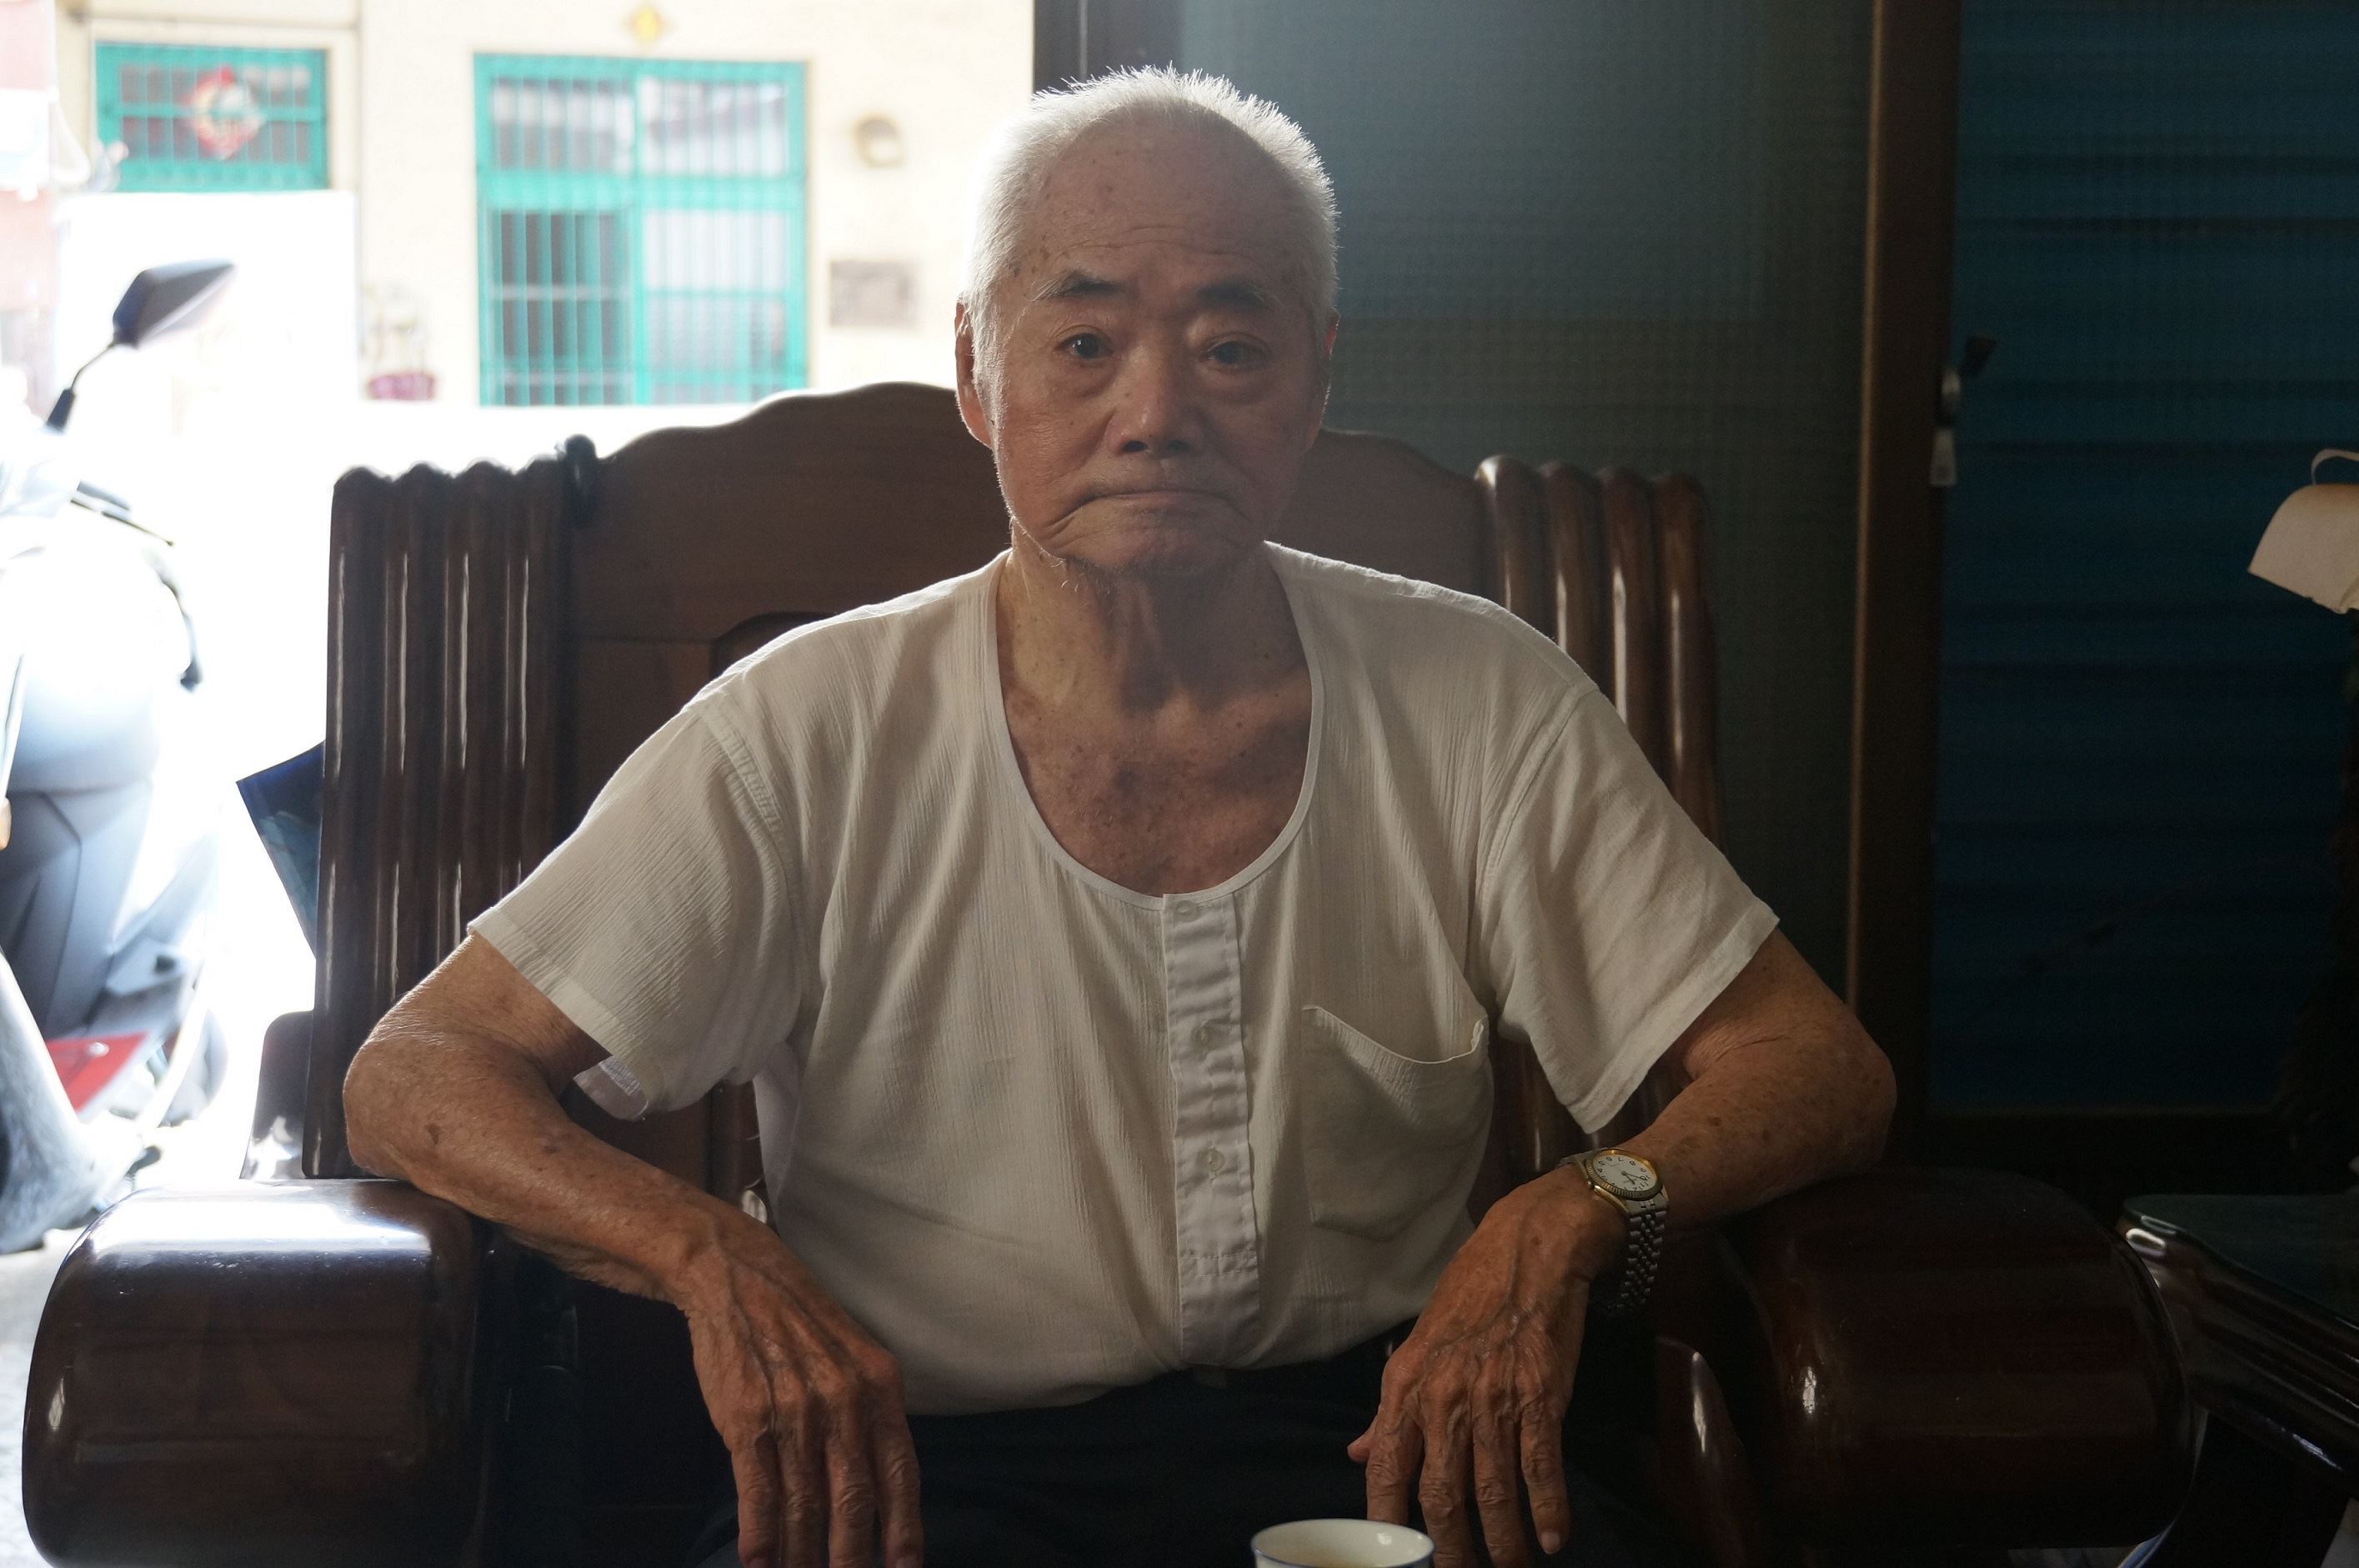 Traditional architectural painting master Chen Ying-pai passed away